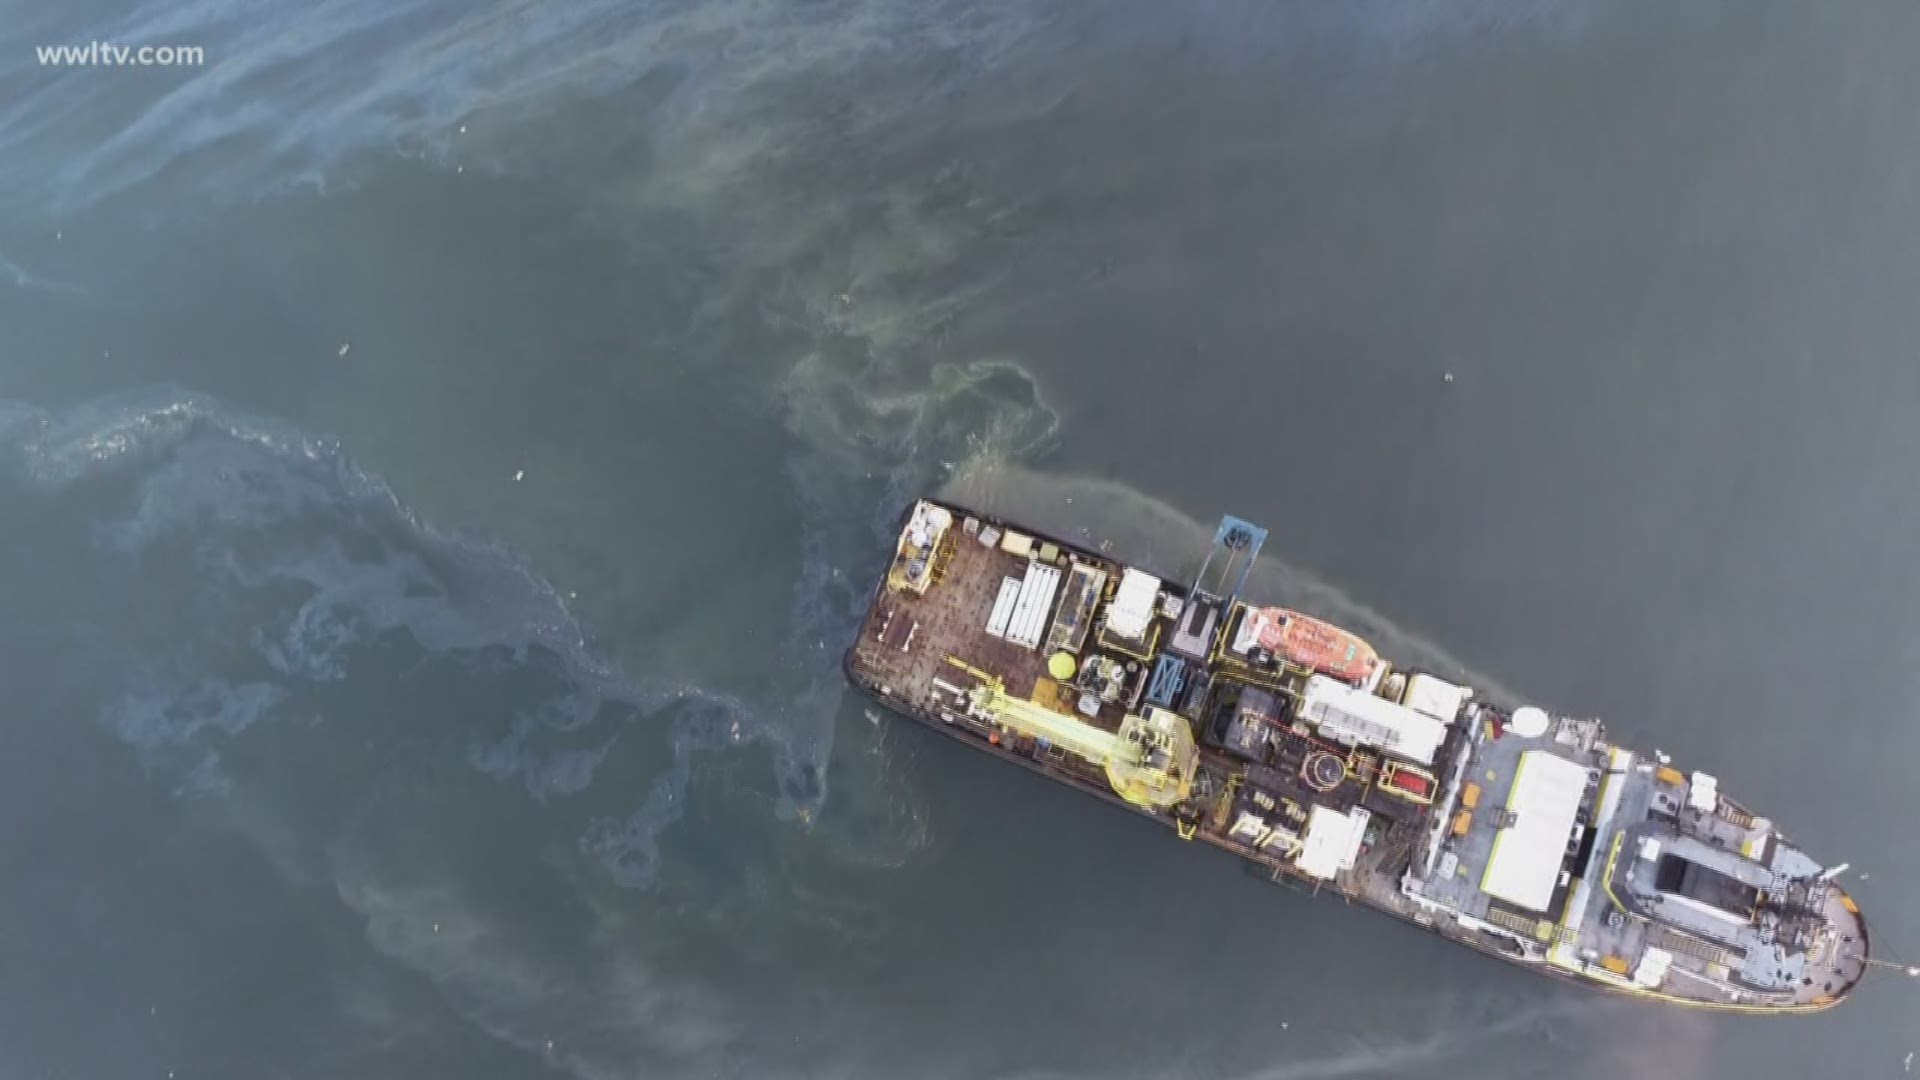 A Belle Chasse-based company is sharing new video, photos and diagrams to show how it managed to contain an oil spill that has fouled the Gulf of Mexico, unchecked, for nearly 15 years.